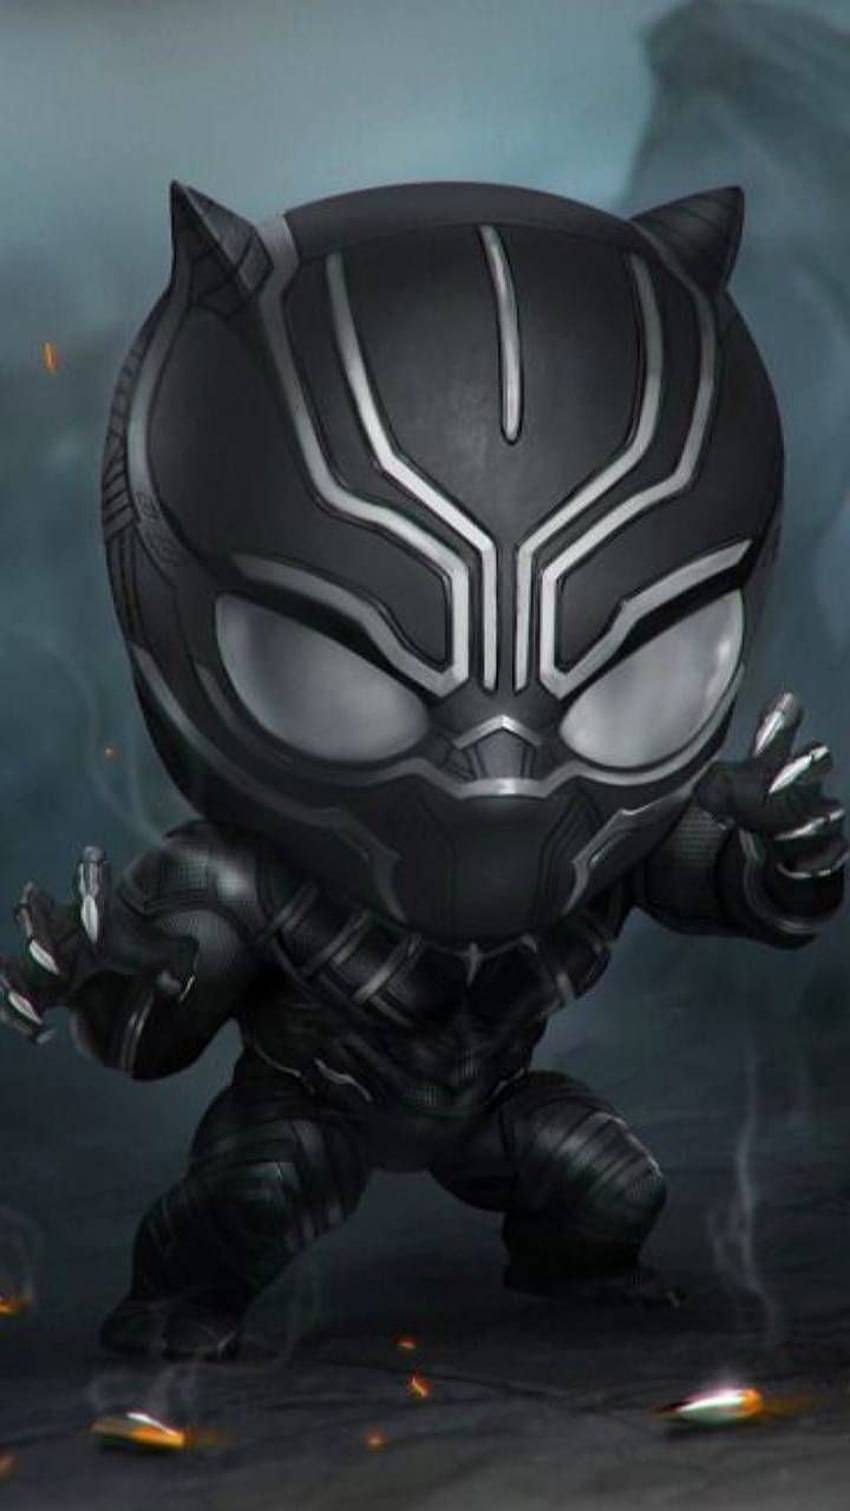 Black panther by georgekev - 87 now. Browse millions of popular b. Marvel spiderman art, Chibi marvel, Marvel comics , Cool Cartoon Panther HD phone wallpaper